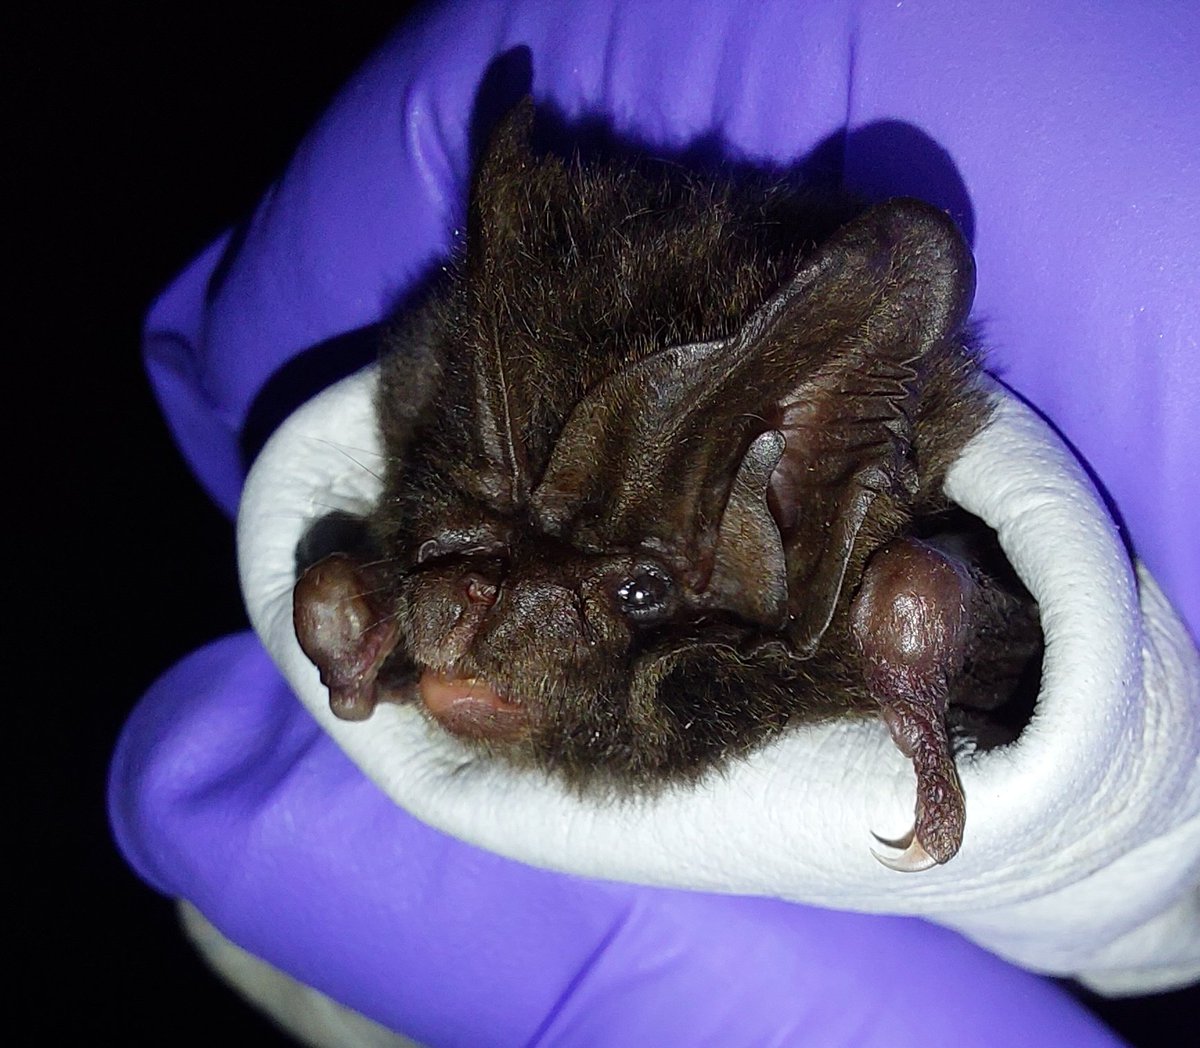 Deadline 9th Jan for funded PhD on #bats, #shrews and #hedgehogs controlling insects in orchards and vineyards in UK with @DrWamonje and @AvalonFresh, @everflyht and @EcotypeGenetics. (International applications welcome). Info here: southcoastbiosciencesdtp.ac.uk/project/can-fr… @SoCoBioDtp